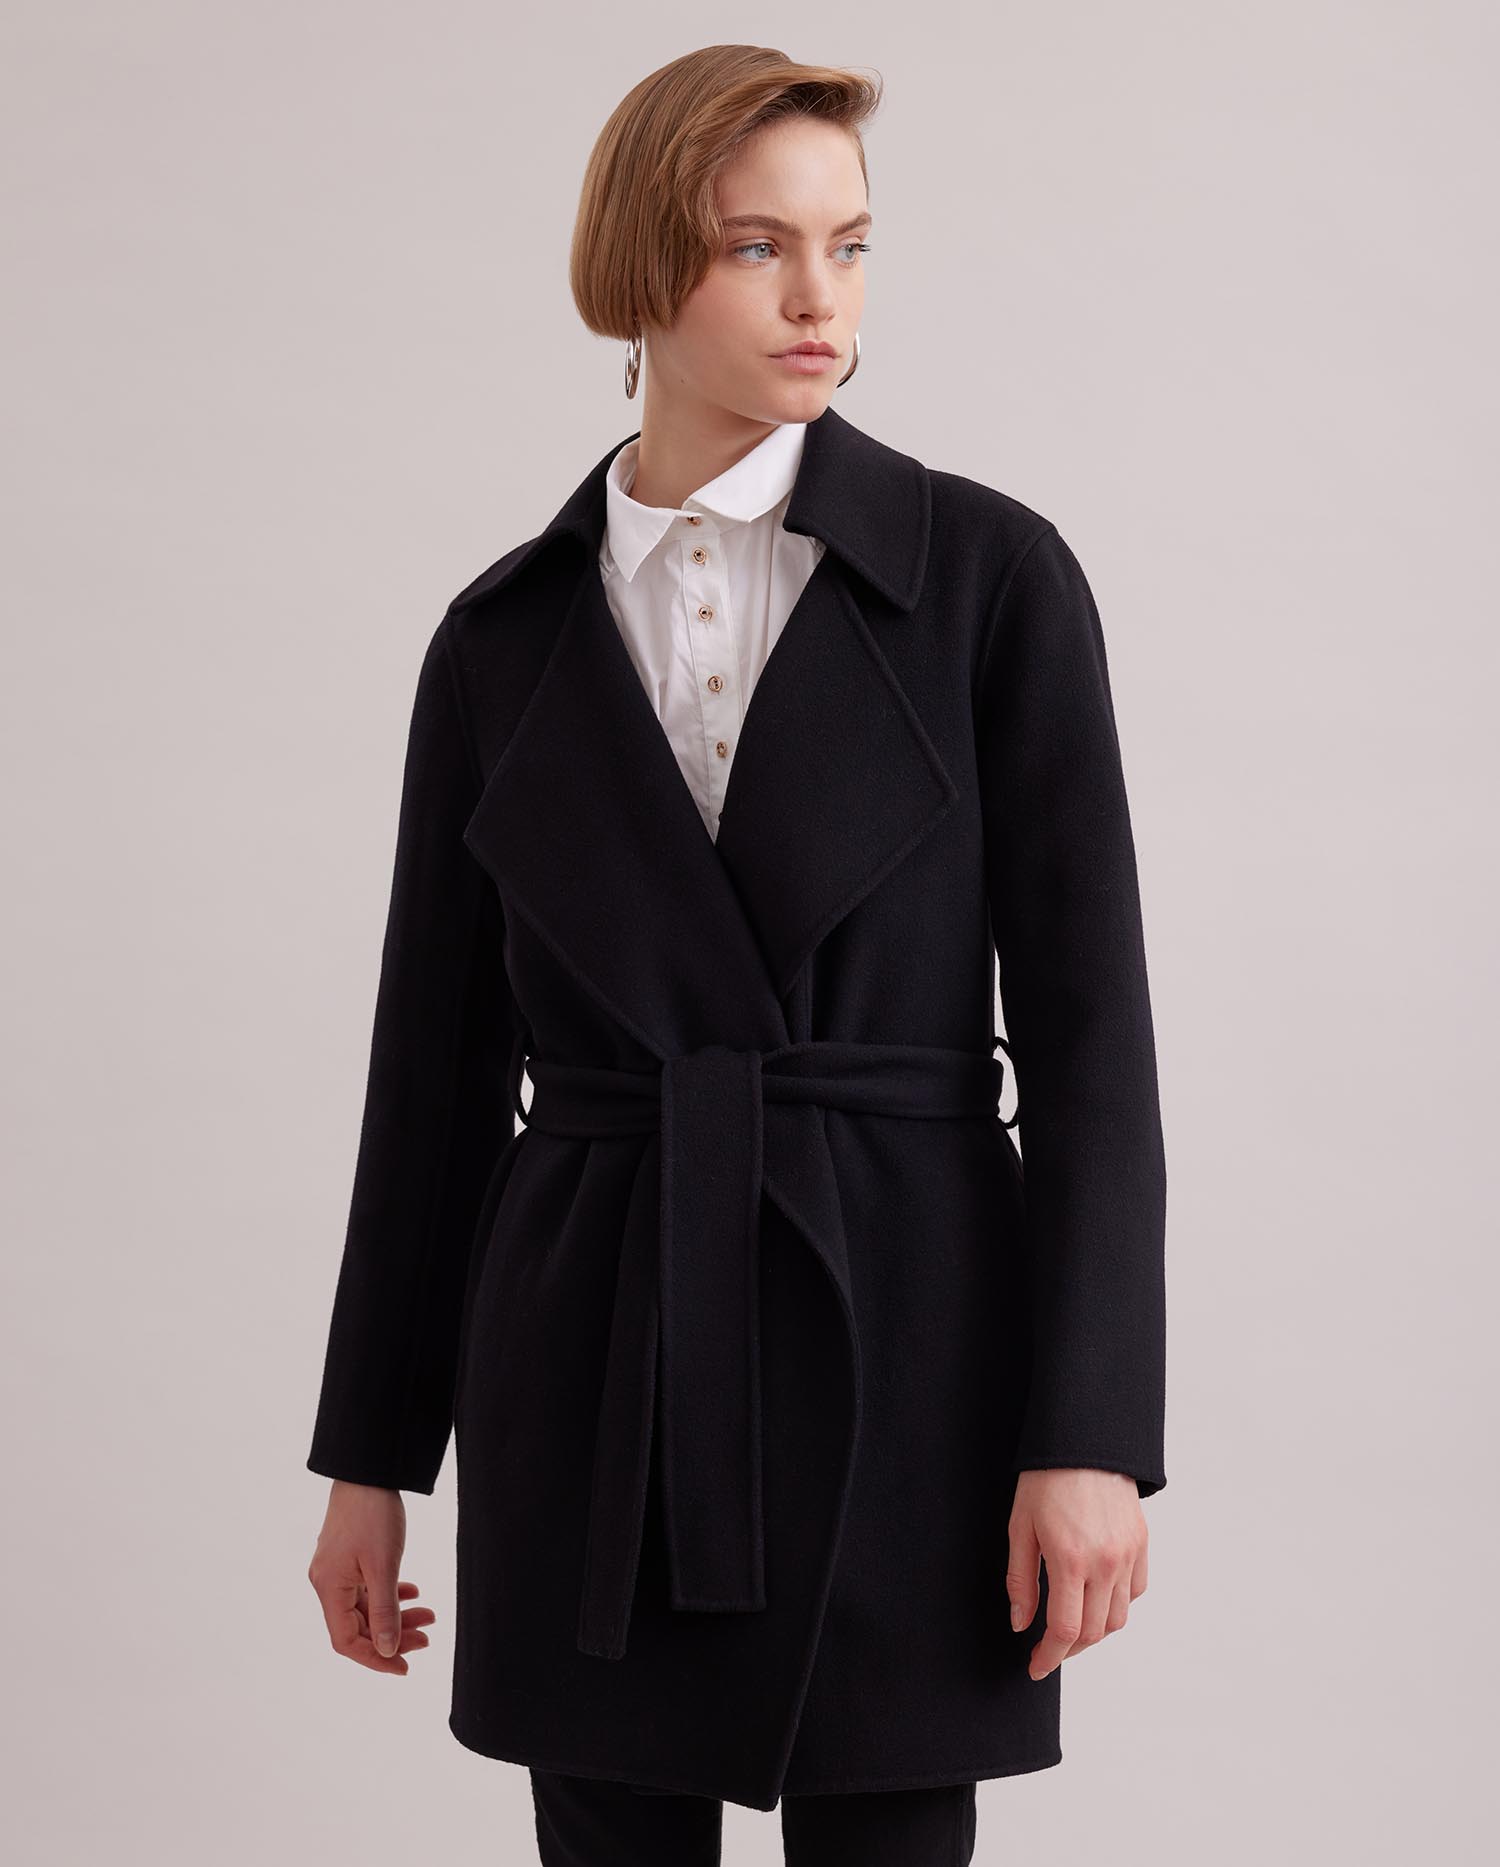 Discover The DELACROIX Black belted open wool blend coat with large notched lapel from ANNE FONTAINE